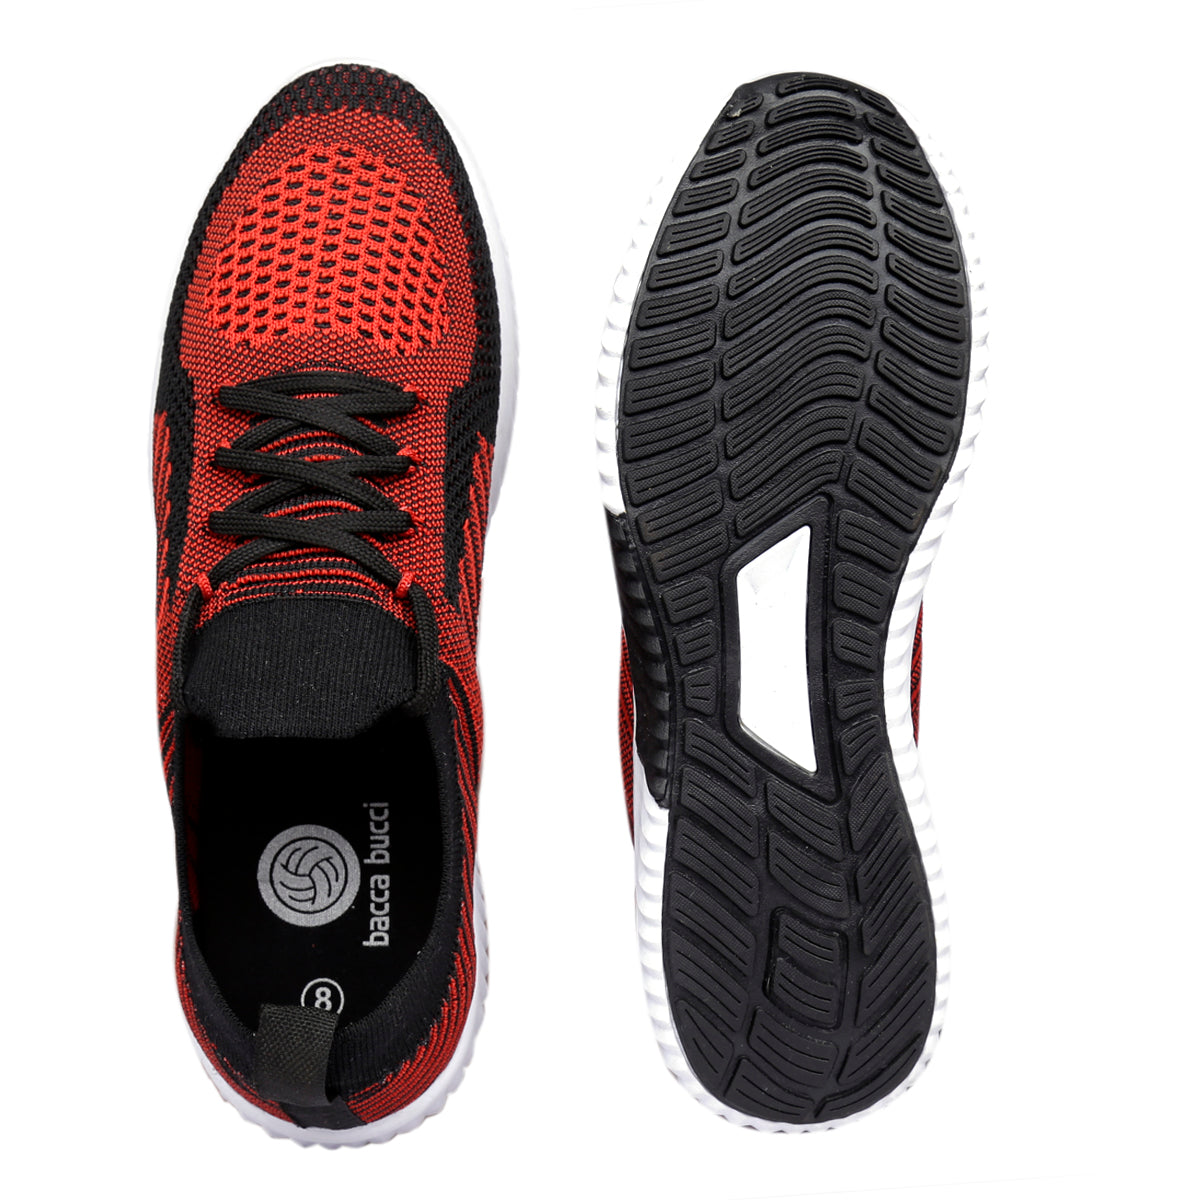 Bacca Bucci JOY Running Shoes, Lightweight Workout Sport Athletic Shoes for Men - Bacca Bucci